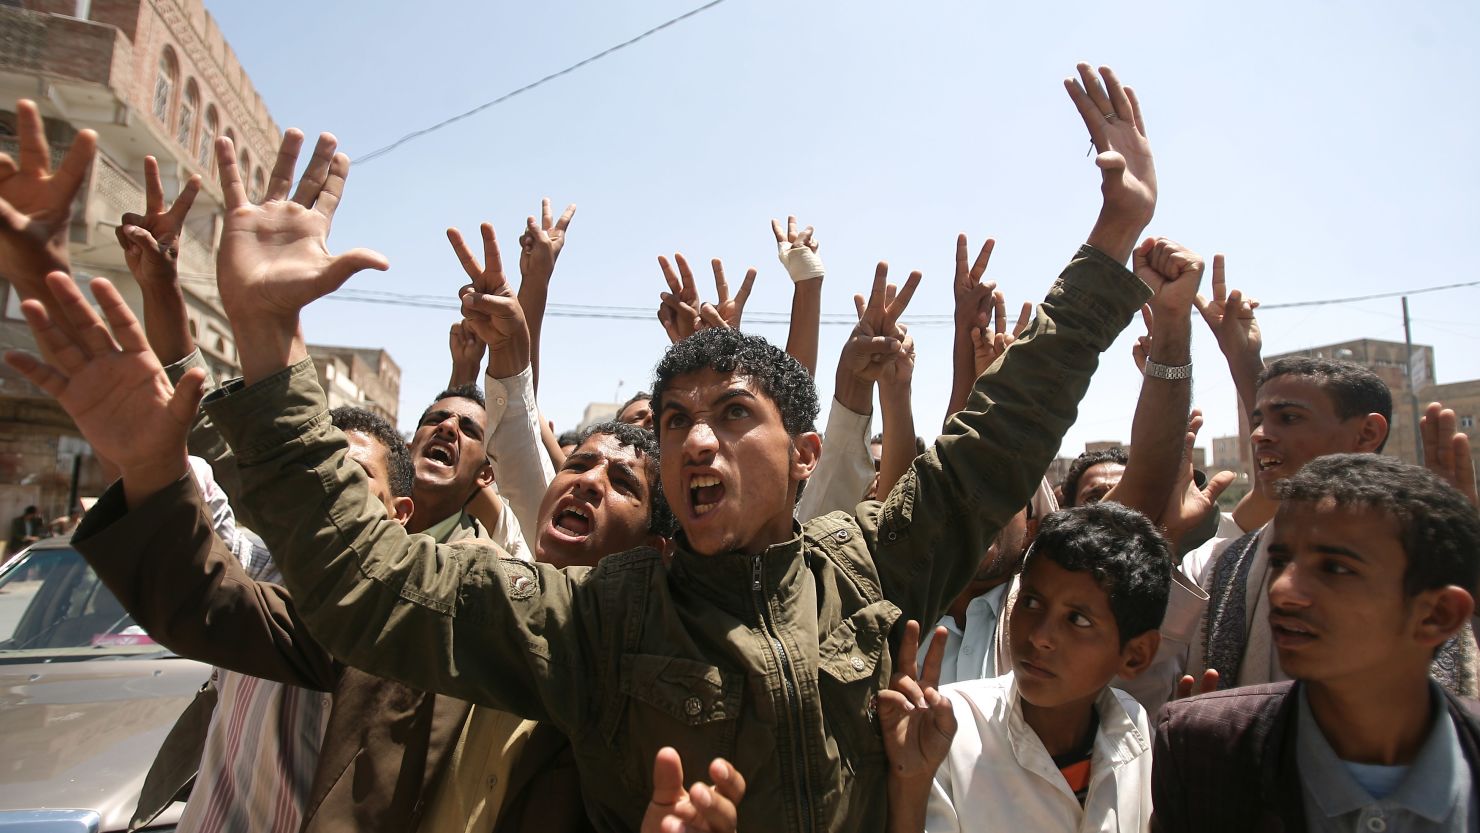 Yemeni anti-regime protesters chant slogans during a demonstration in Sanaa on October 2, 2011.